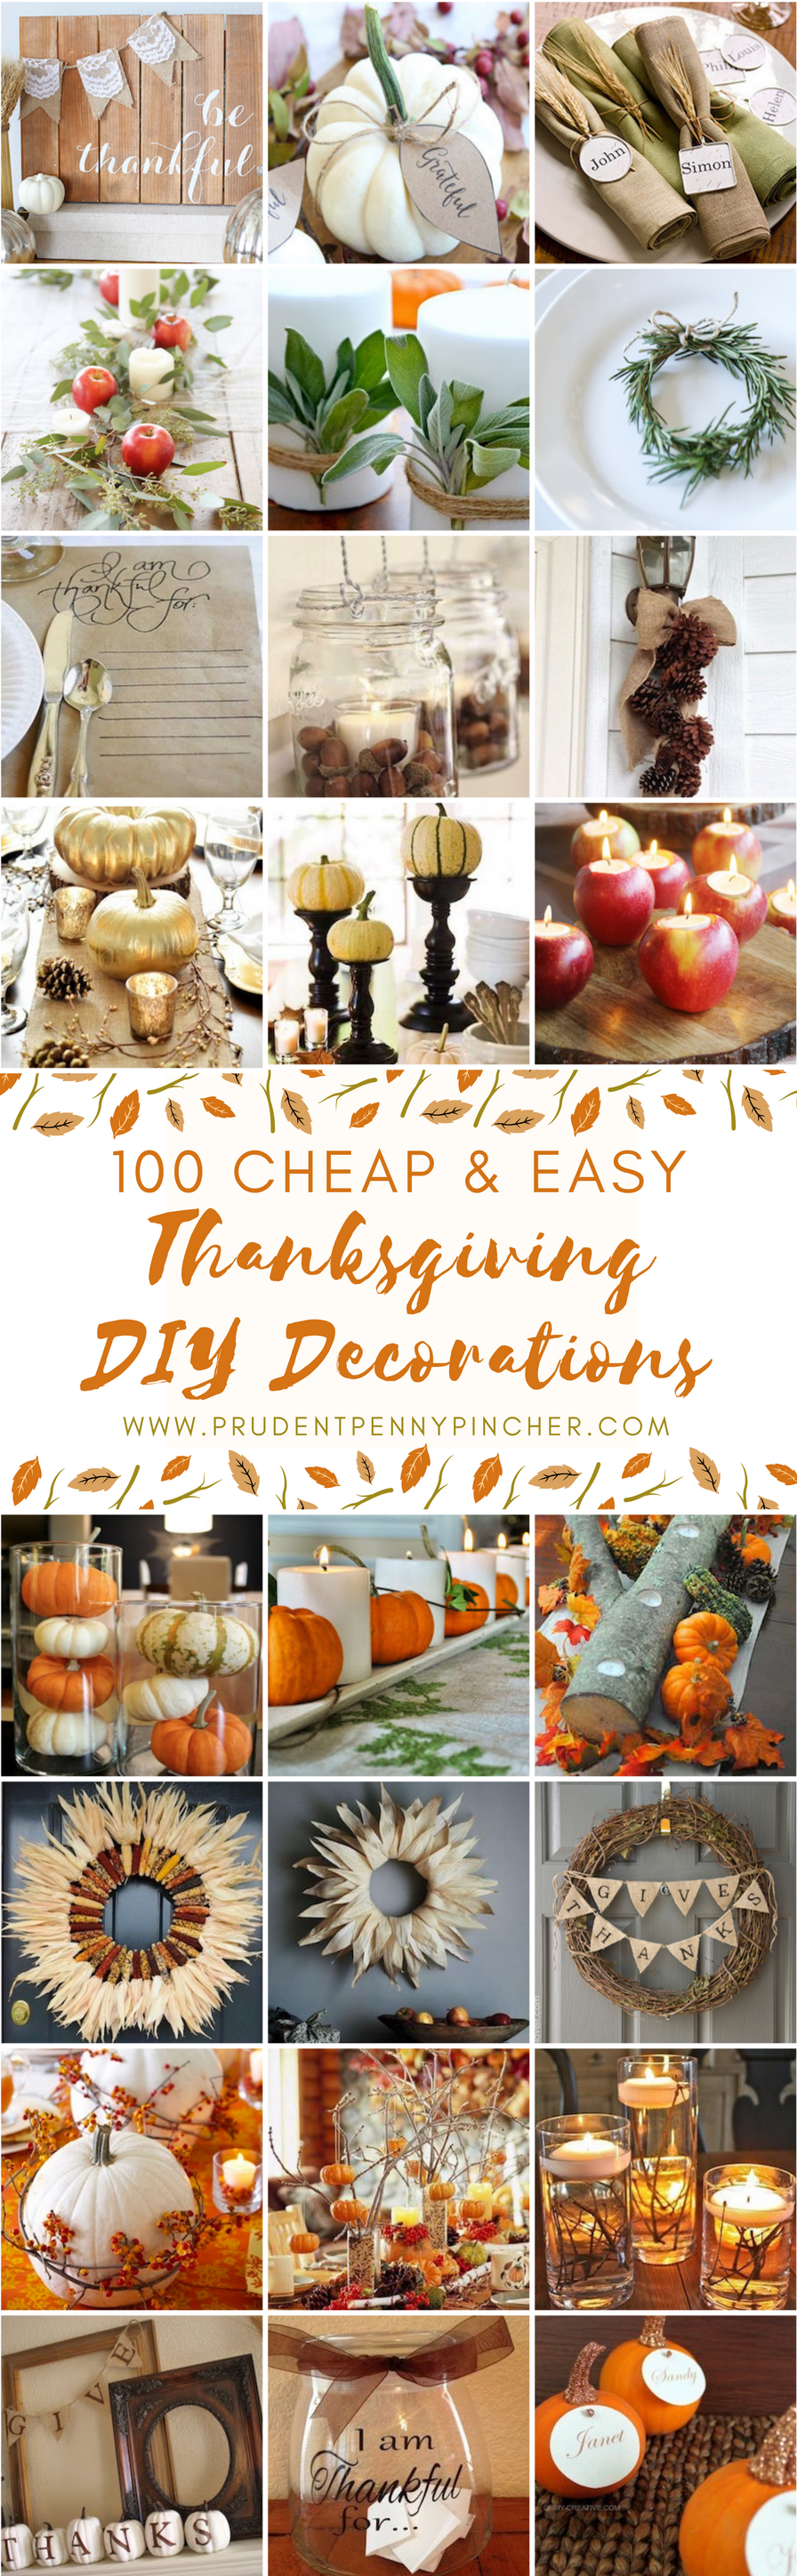 100 Cheap And Easy DIY Thanksgiving Decorations Prudent Penny